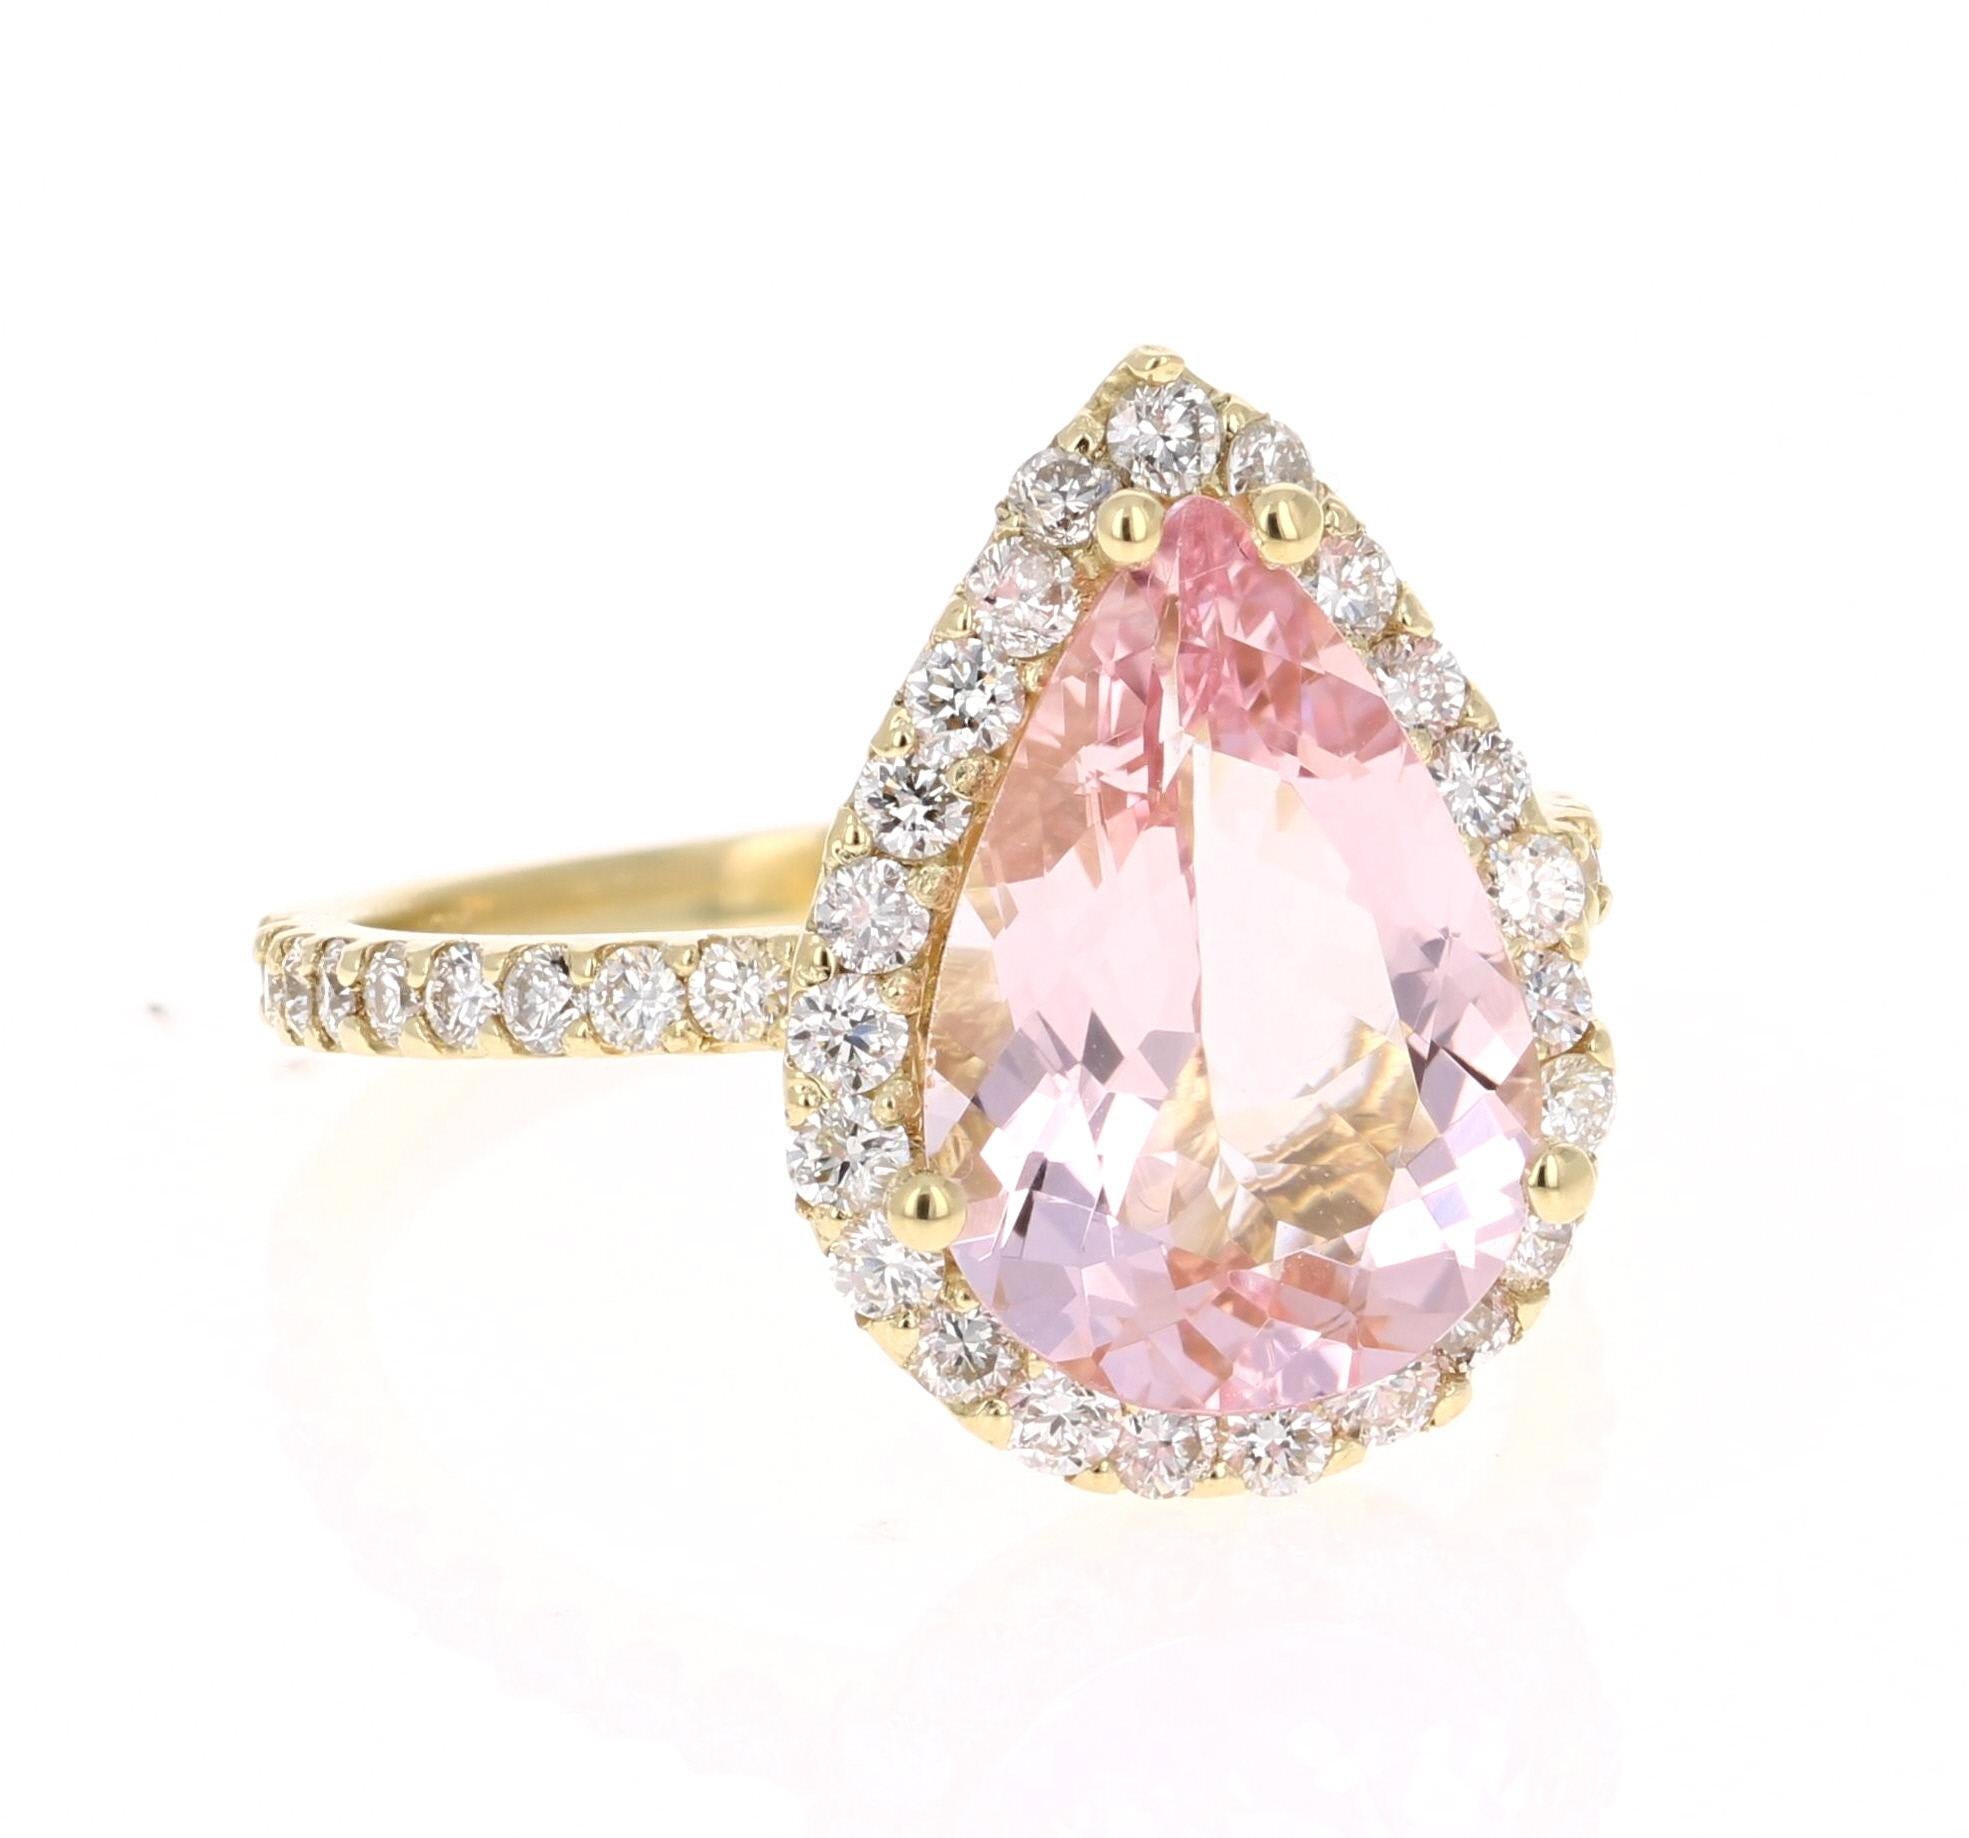 A lovely Engagement Ring Option or as an alternate to a Pink Diamond Ring! 

This gorgeous and classy Morganite Diamond Ring has a 3.25 Carat Pear Cut Pink Morganite and has a Halo of 45 Round Cut Diamonds that weigh 0.87 carats (Clarity: VS2,